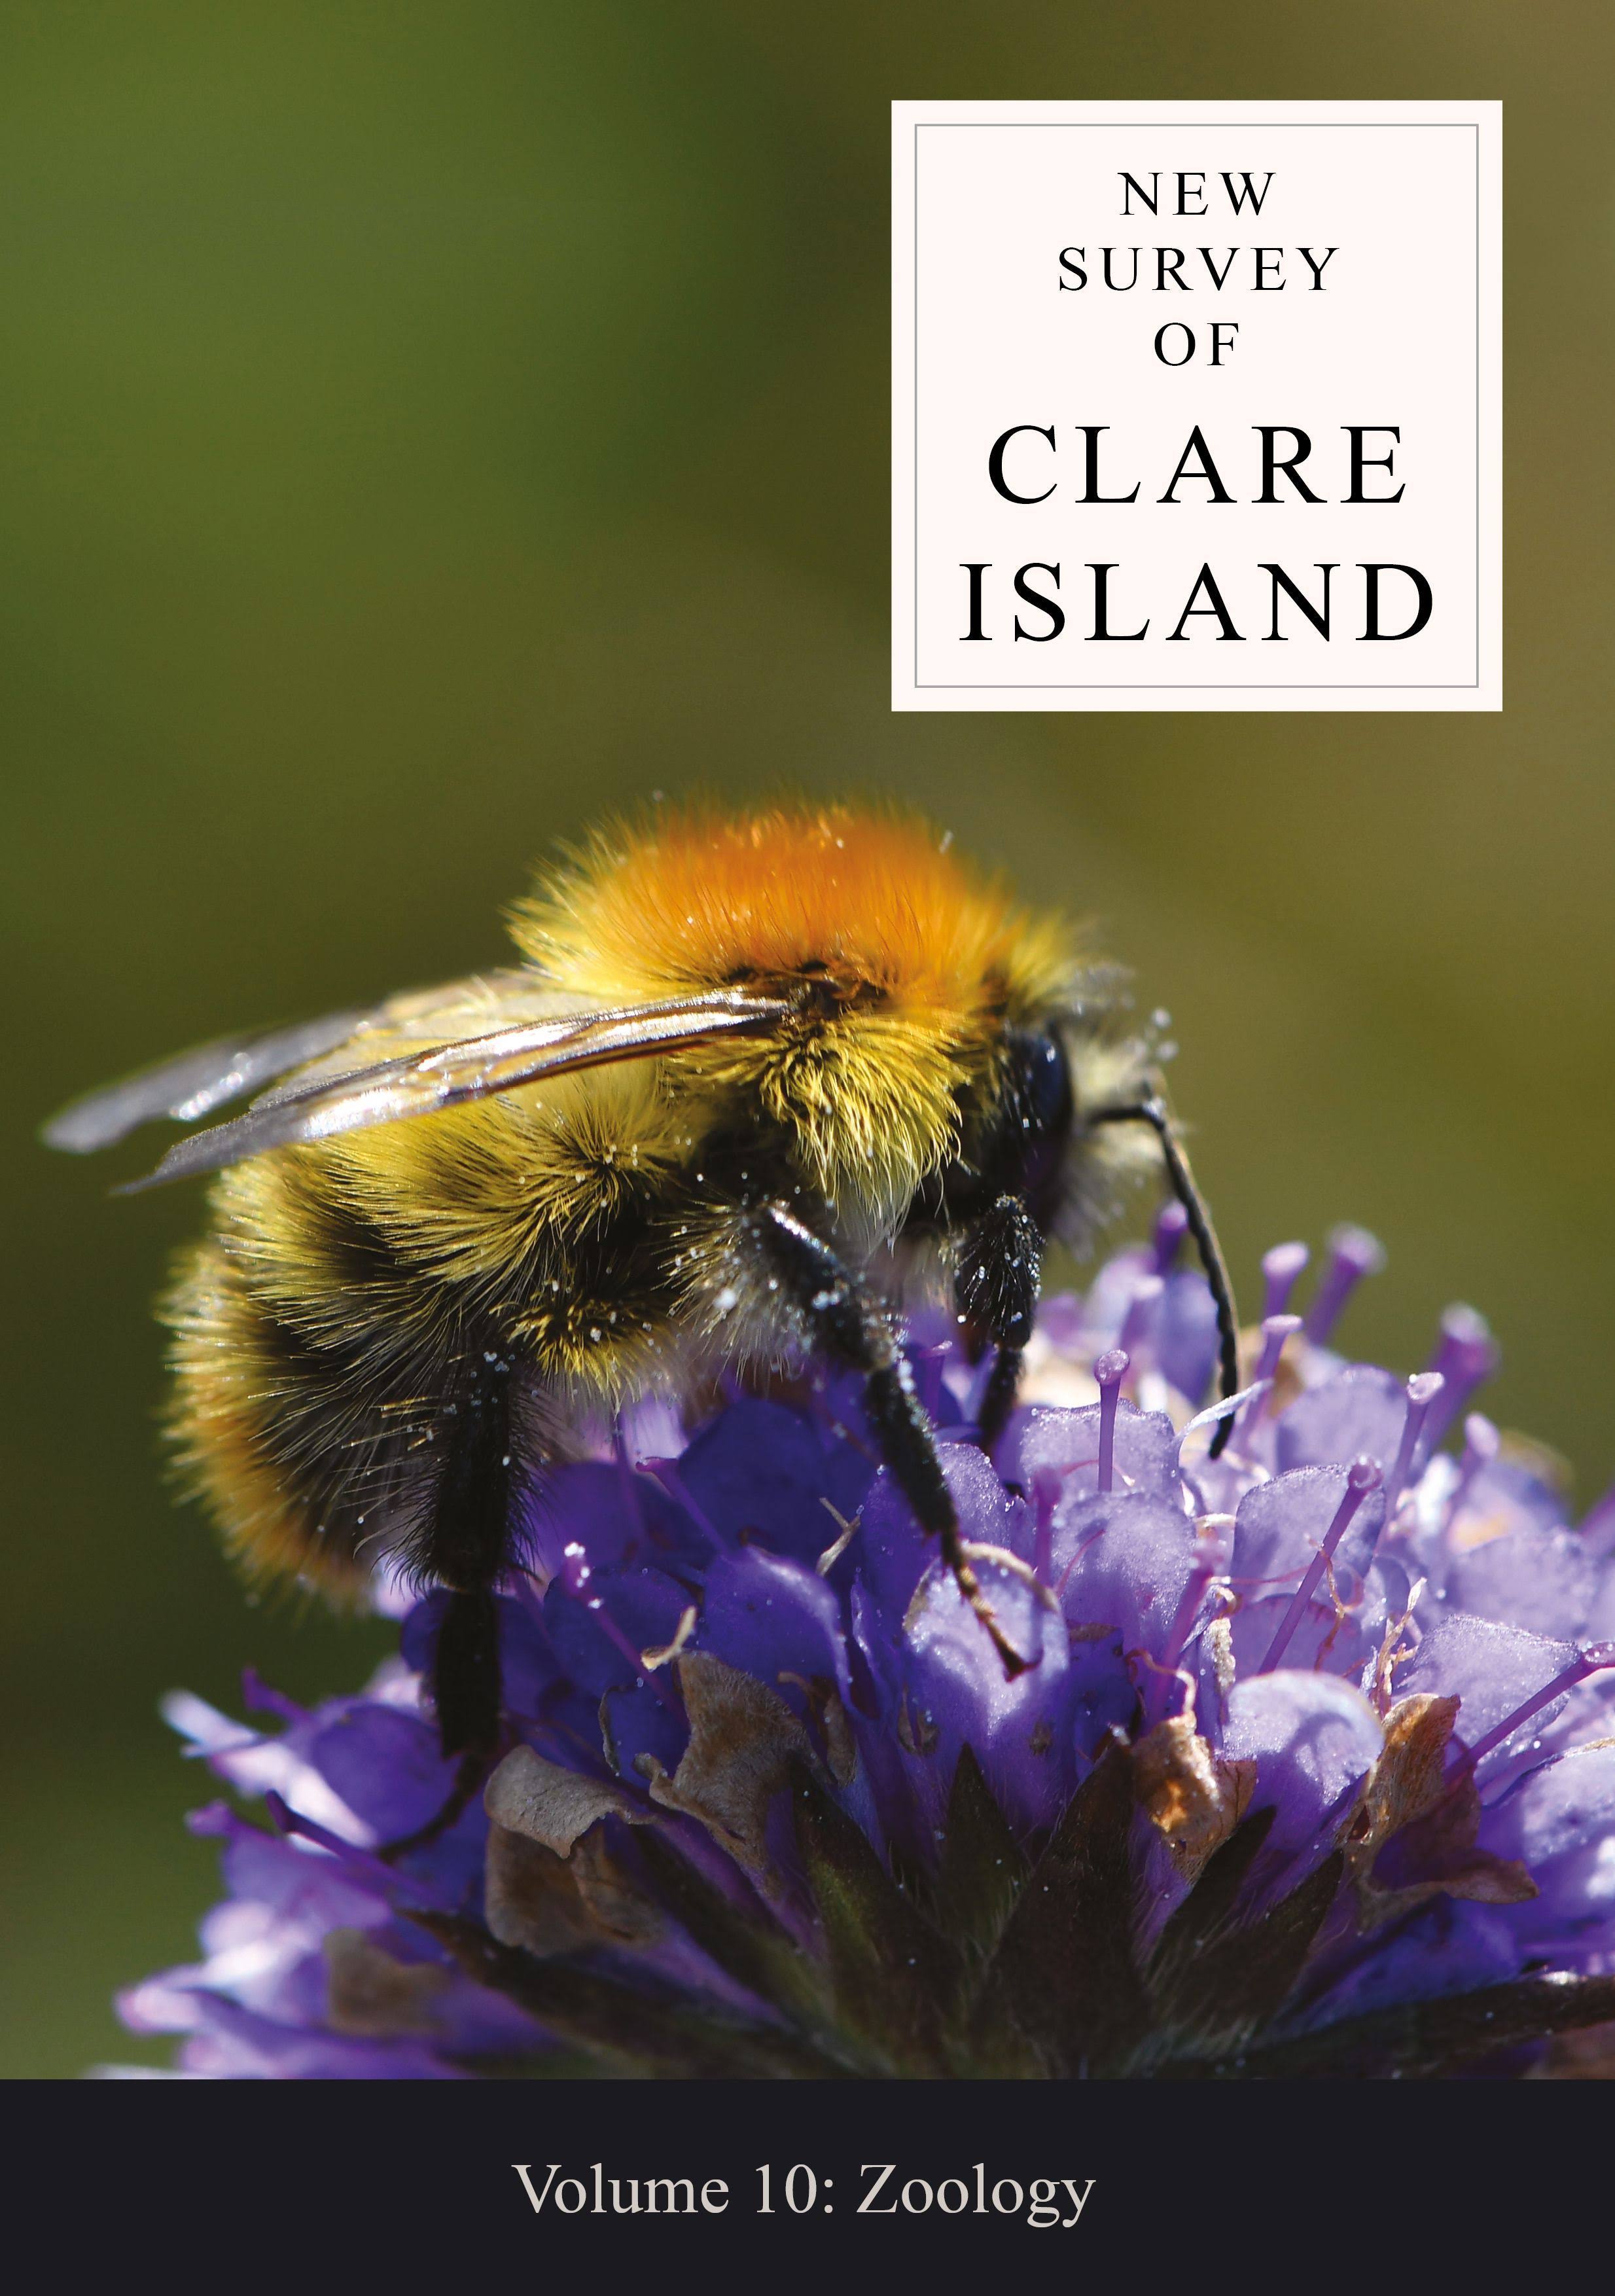 New Survey of Clare Island Volume 10: Land and by John Breen